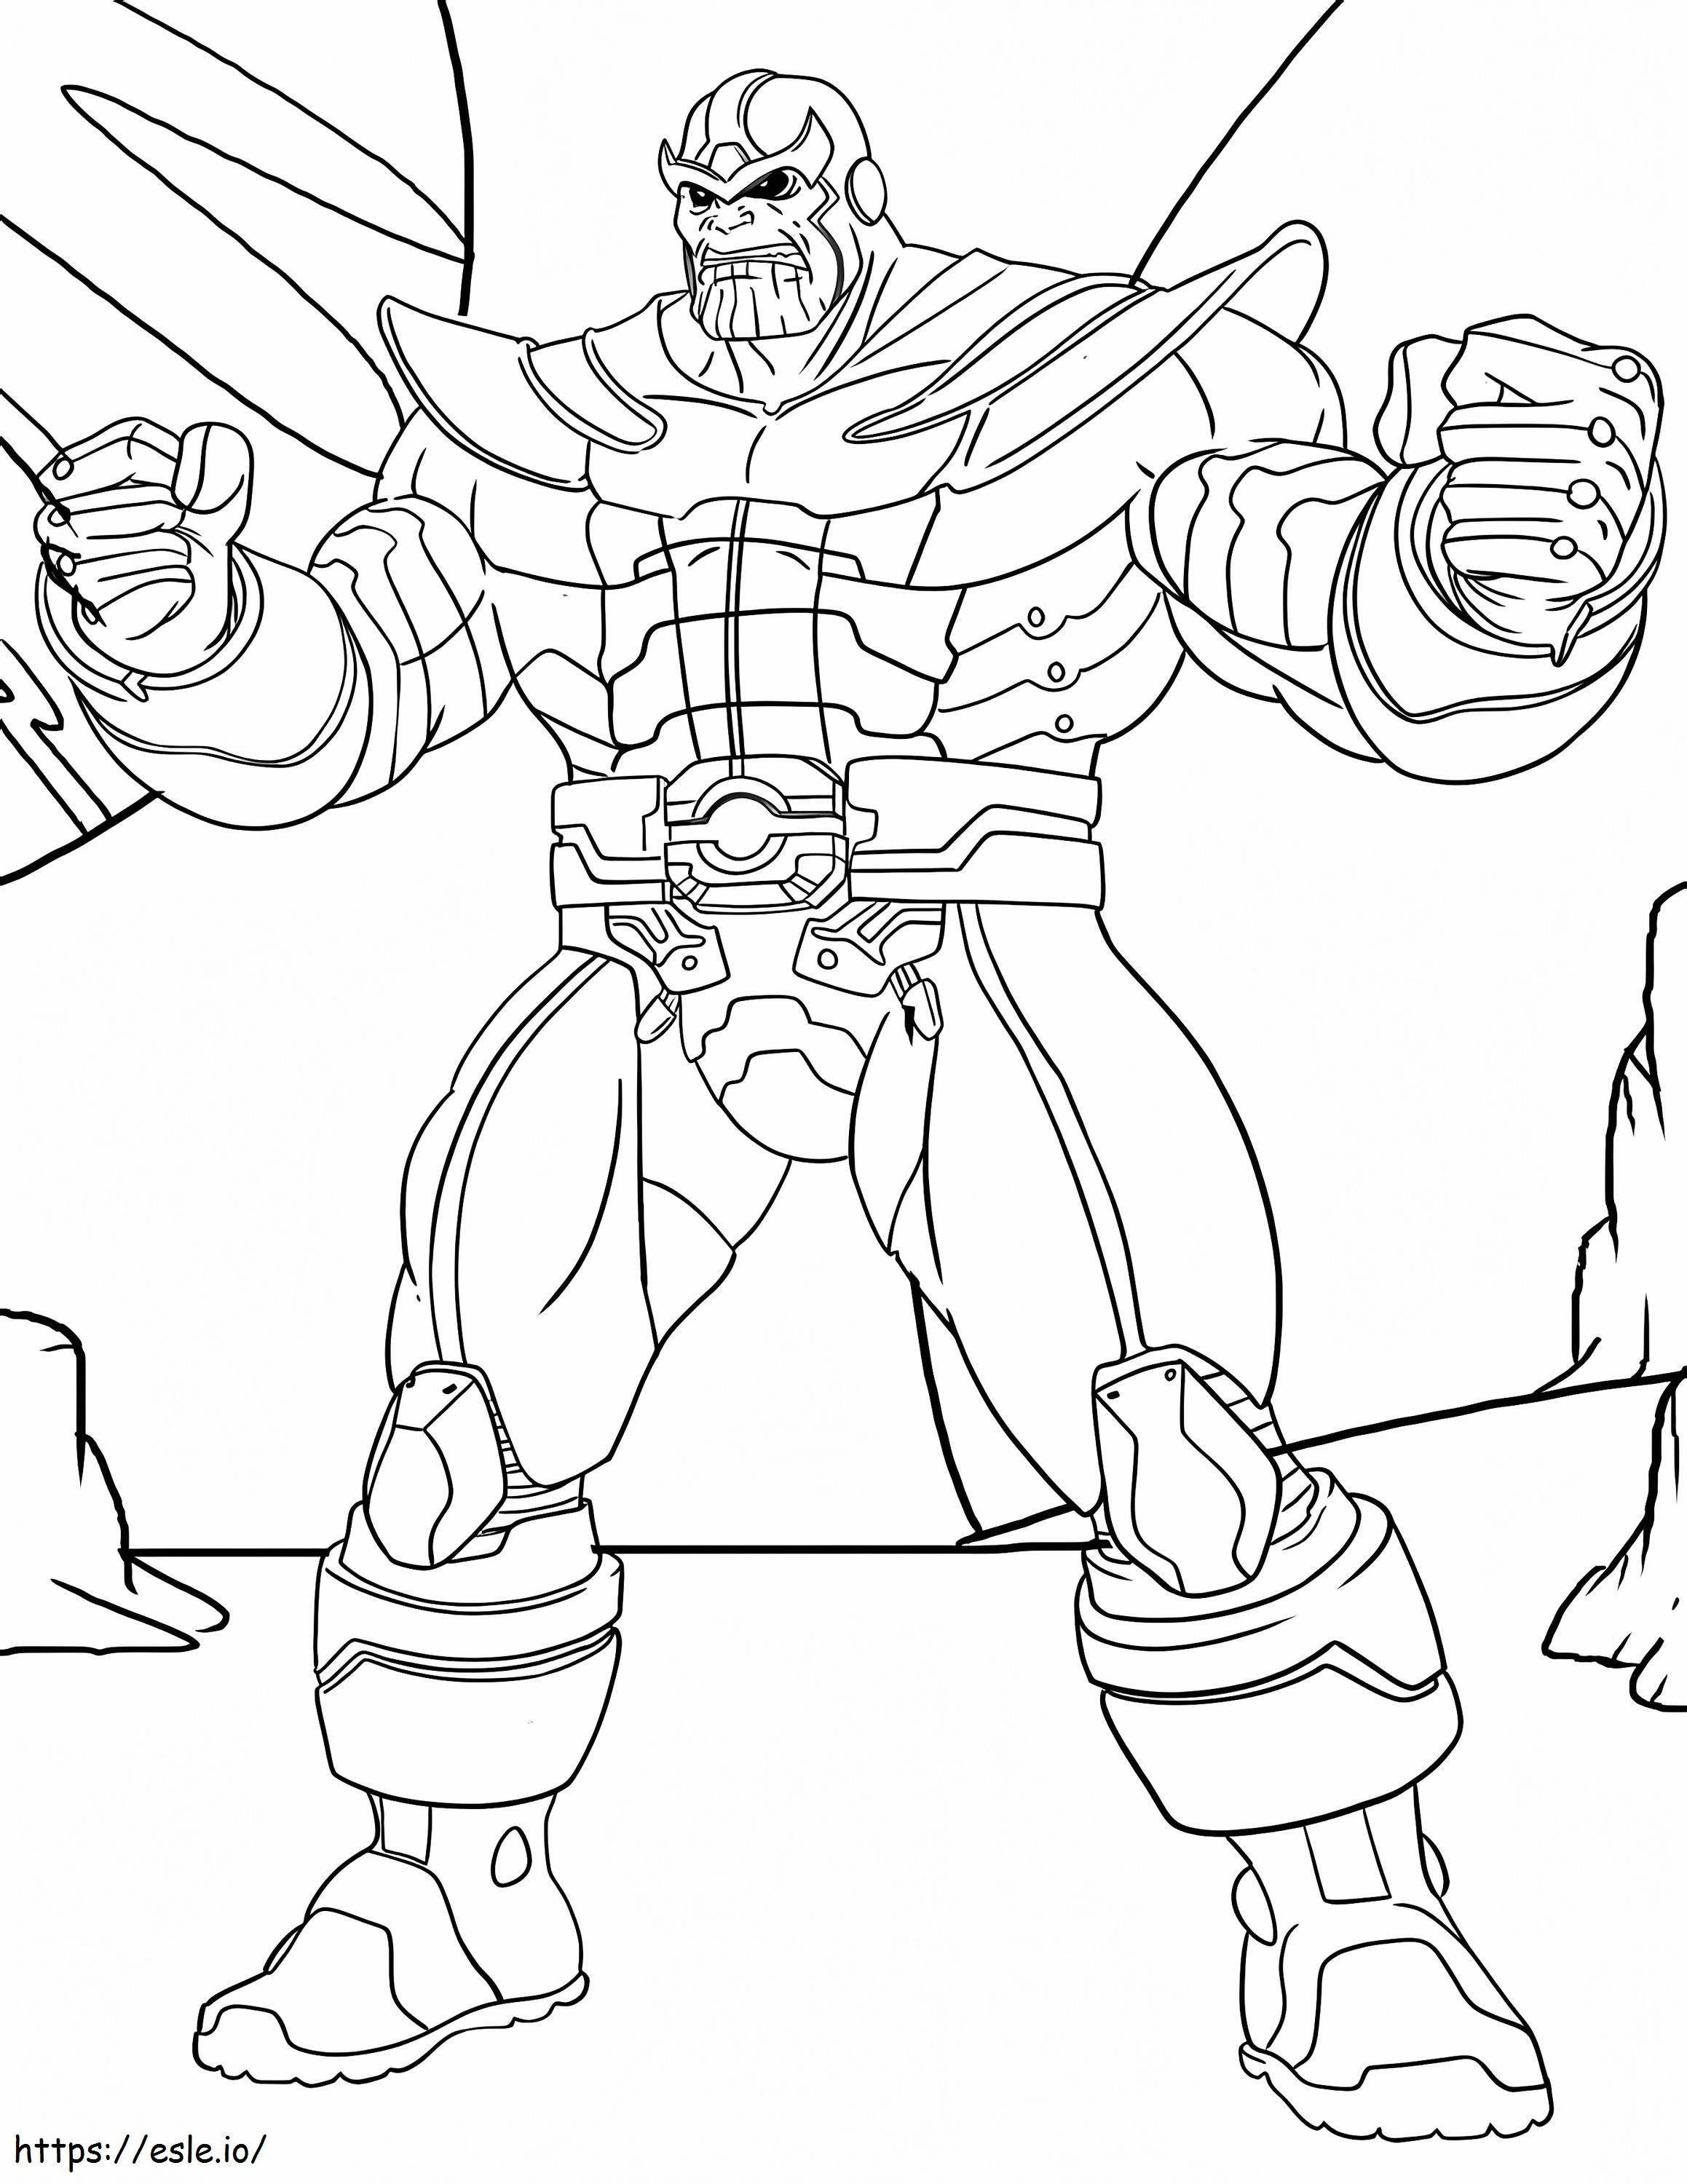 To Worship Thanos coloring page